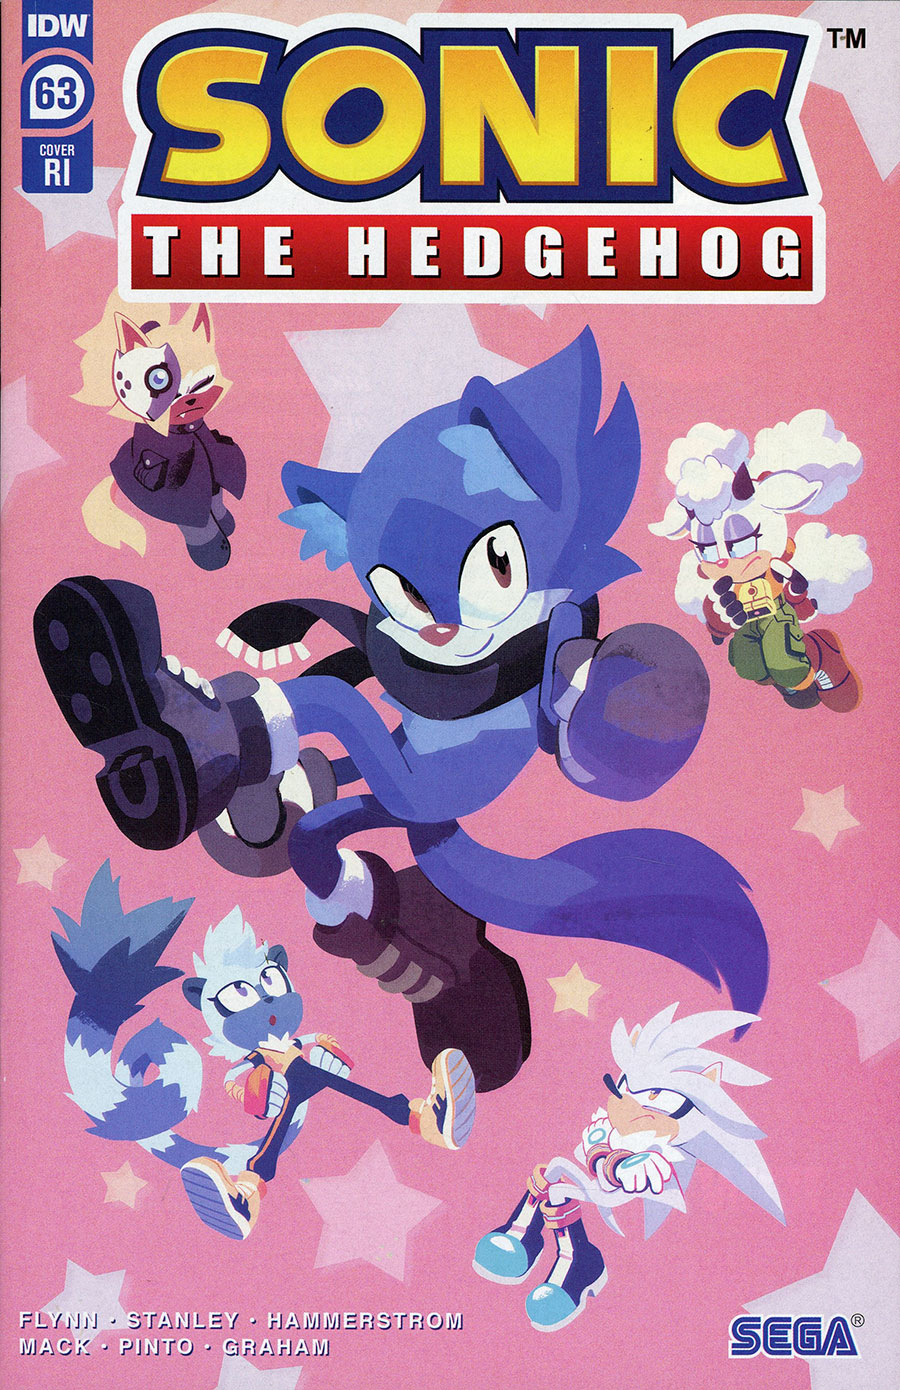 Sonic The Hedgehog Vol 3 #63 Cover C Incentive Nathalie Fourdraine Variant Cover